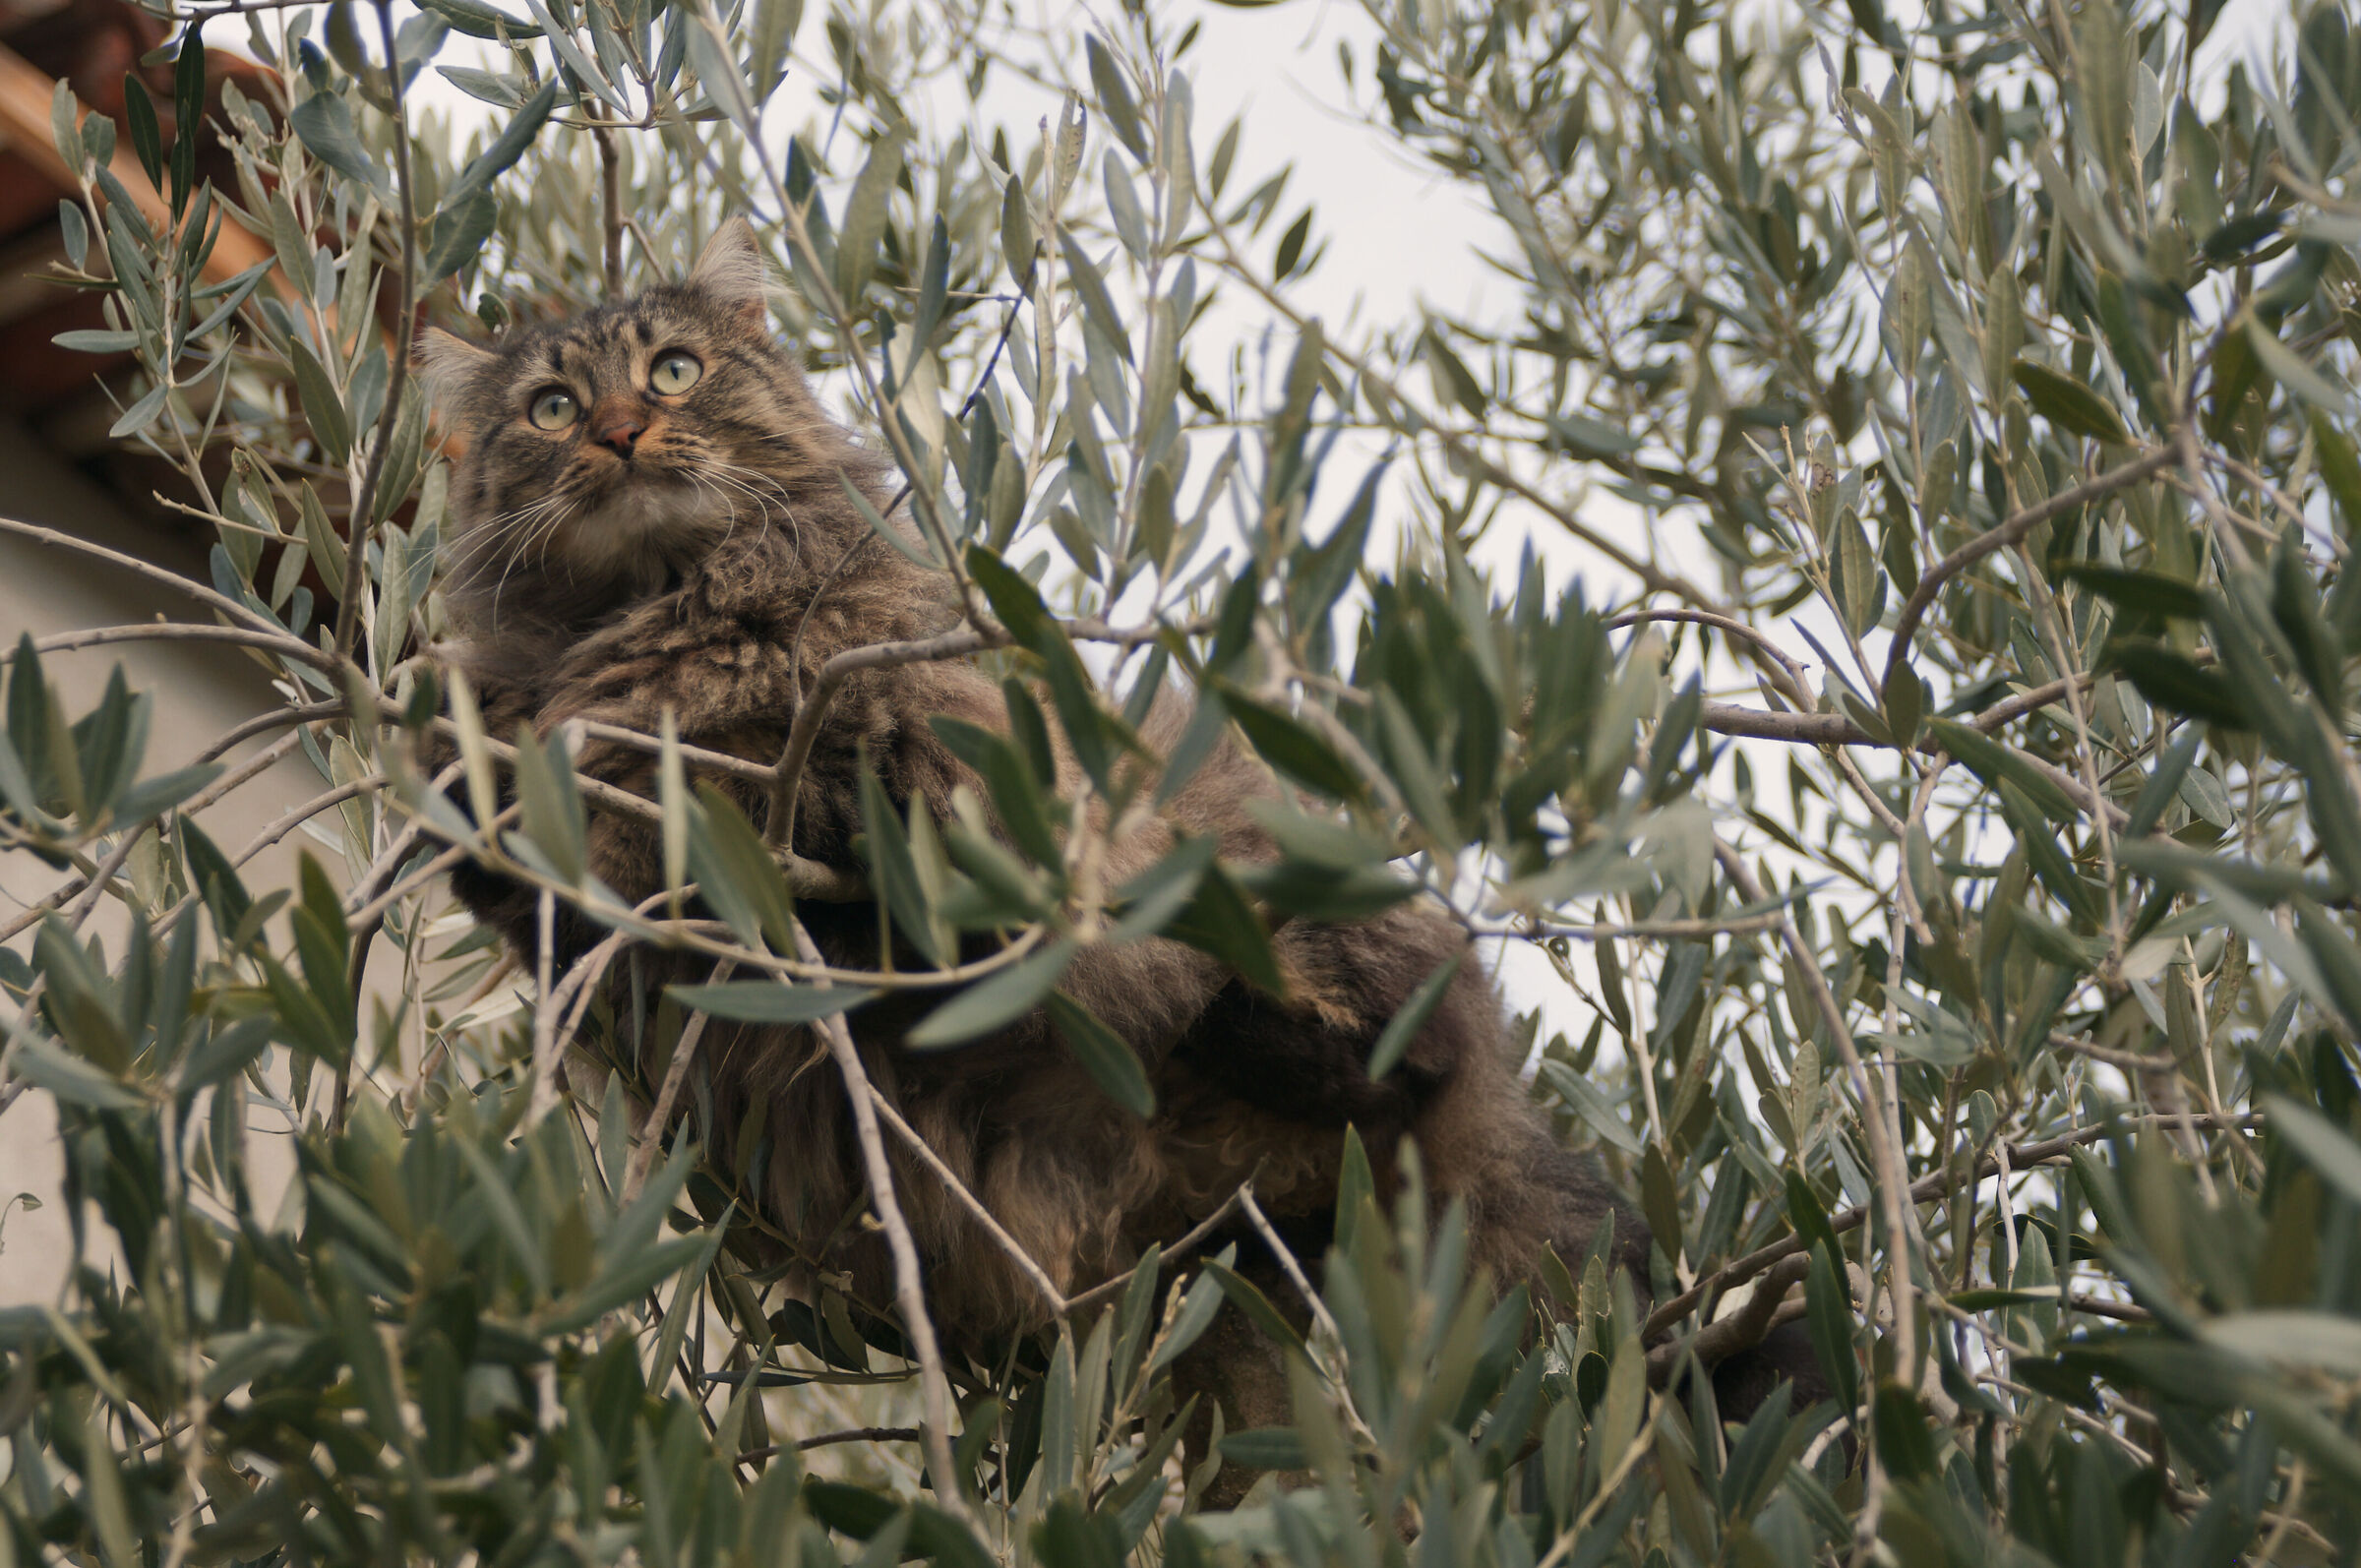 The cat of the olive trees...